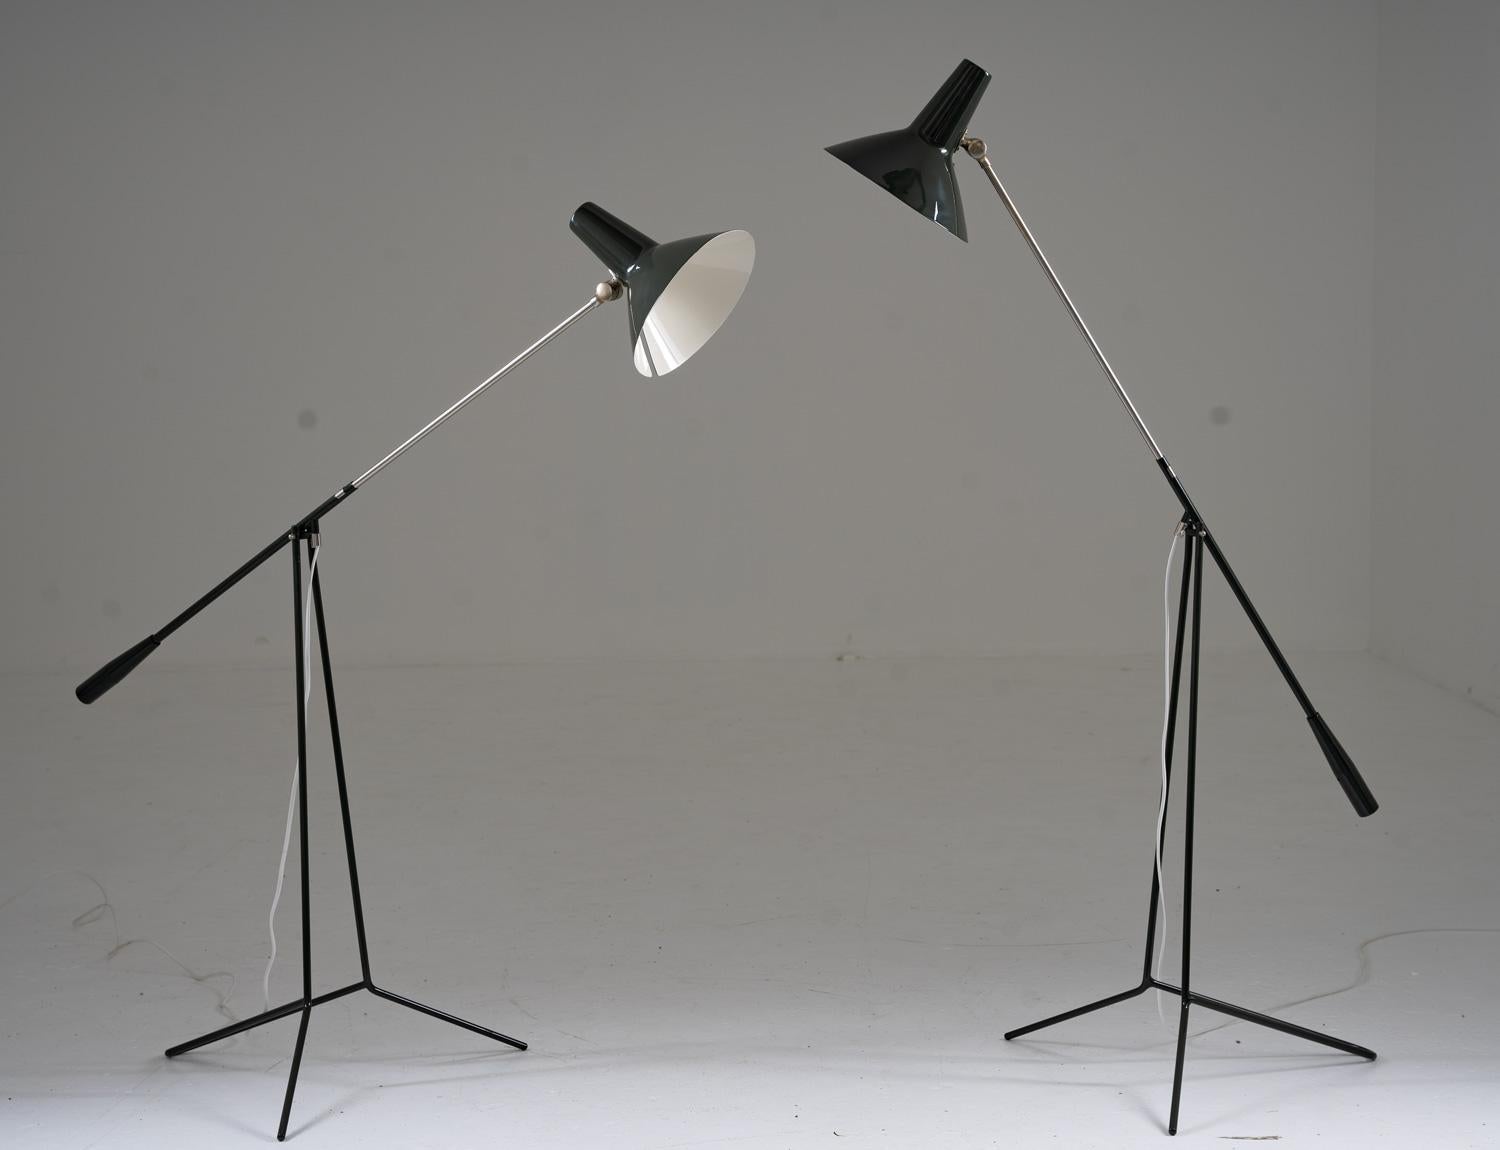 Beautiful floor lamps model E1780 by ASEA, Sweden, 1950s.
These rarely seen lamps consist of a tripod base, holding a chrome rod with a counter weight, that allows you to direct the light in almost any angle. 

Condition: Completely restored and